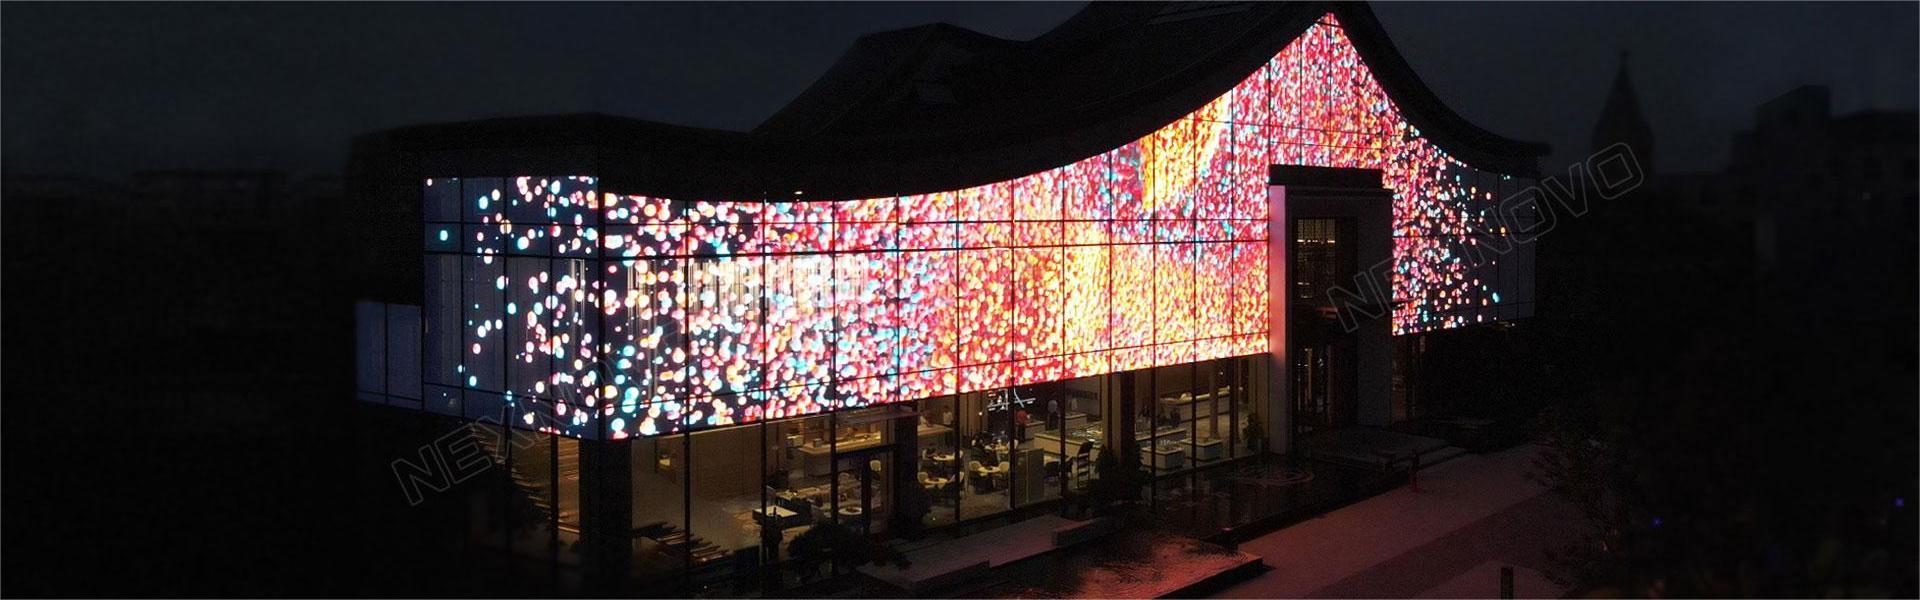 Outdoor Transoarent LED Display